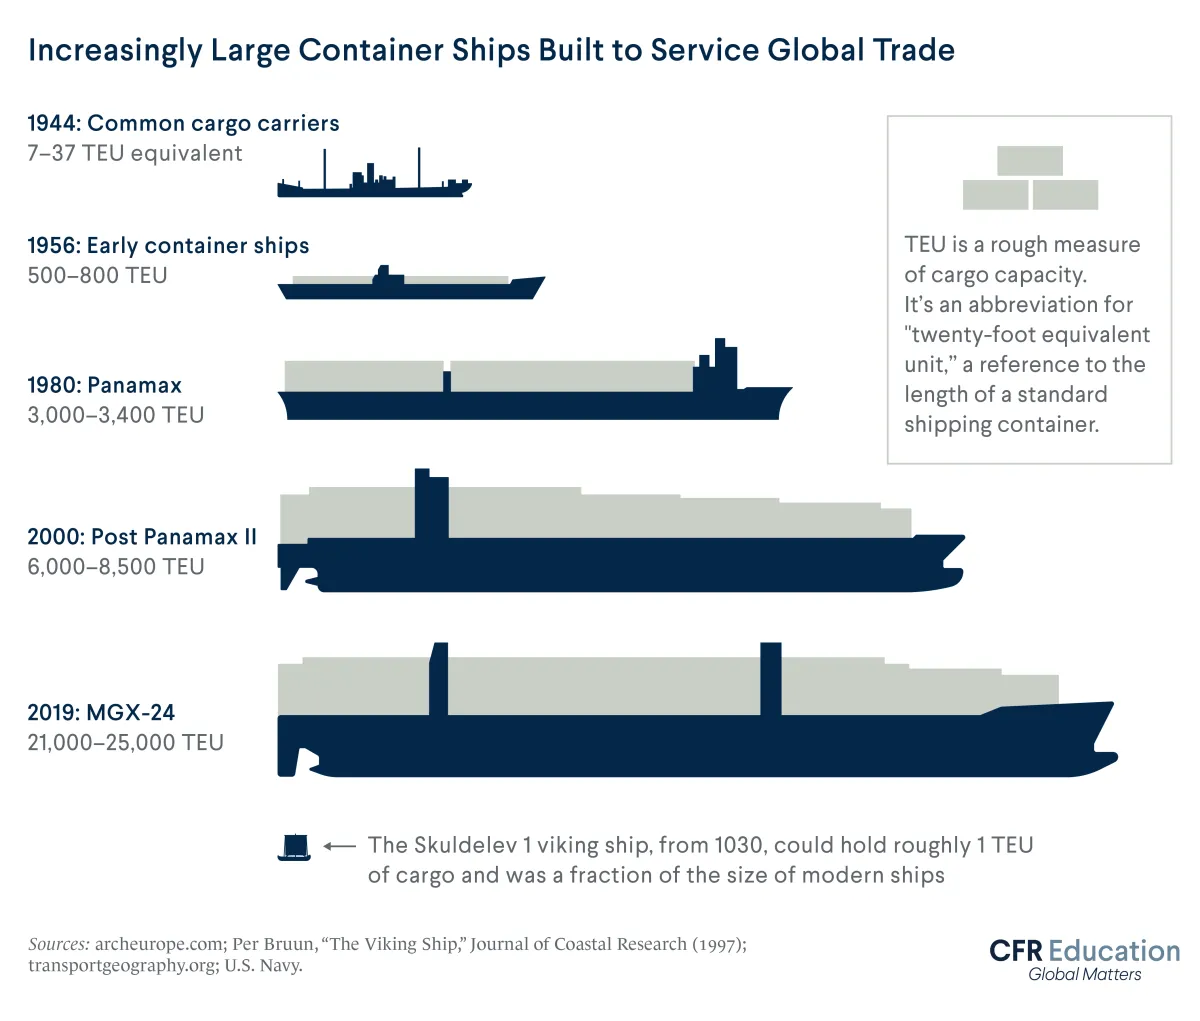 Graphic shows how the size of container ships has grown since they were first introduced in the 1950s. They now carry thouands of times more tradeable goods than common cargo ships did in the 1940s. For more info contact us at cfr_education@cfr.org.